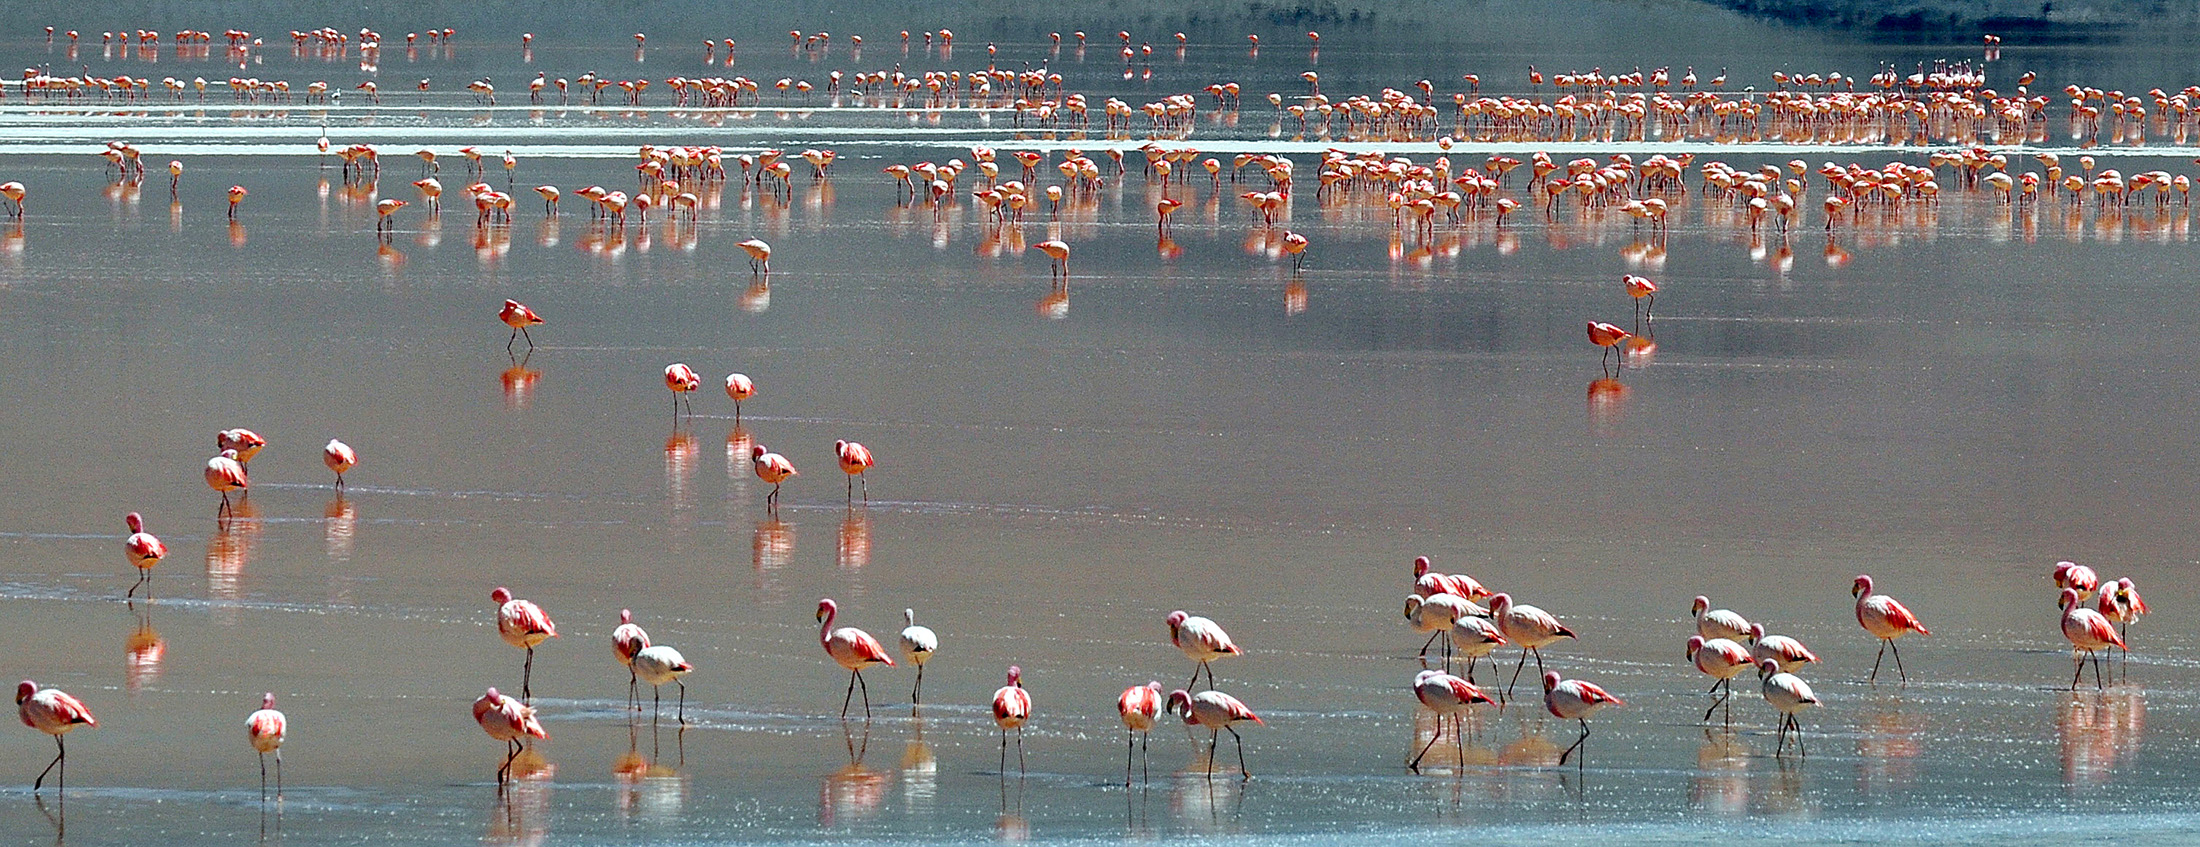 A flock of flamingos are seen wading in Laguna Colorada located within the Eduardo Abaroa Andean National Fauna Reserve in the highlands of San Luis, near the border with Chile, in the Uyuni salt flats, Bolivia. The Uyuni salt flats are estimated to contain 10 billion tons of salt - of which 25,000 tons are extracted every year - as well as 100 million tons of lithium, making it one of the largest global reserves of this mineral, according to state officials at the Bolivian Mining Corporation (COMIBOL).
